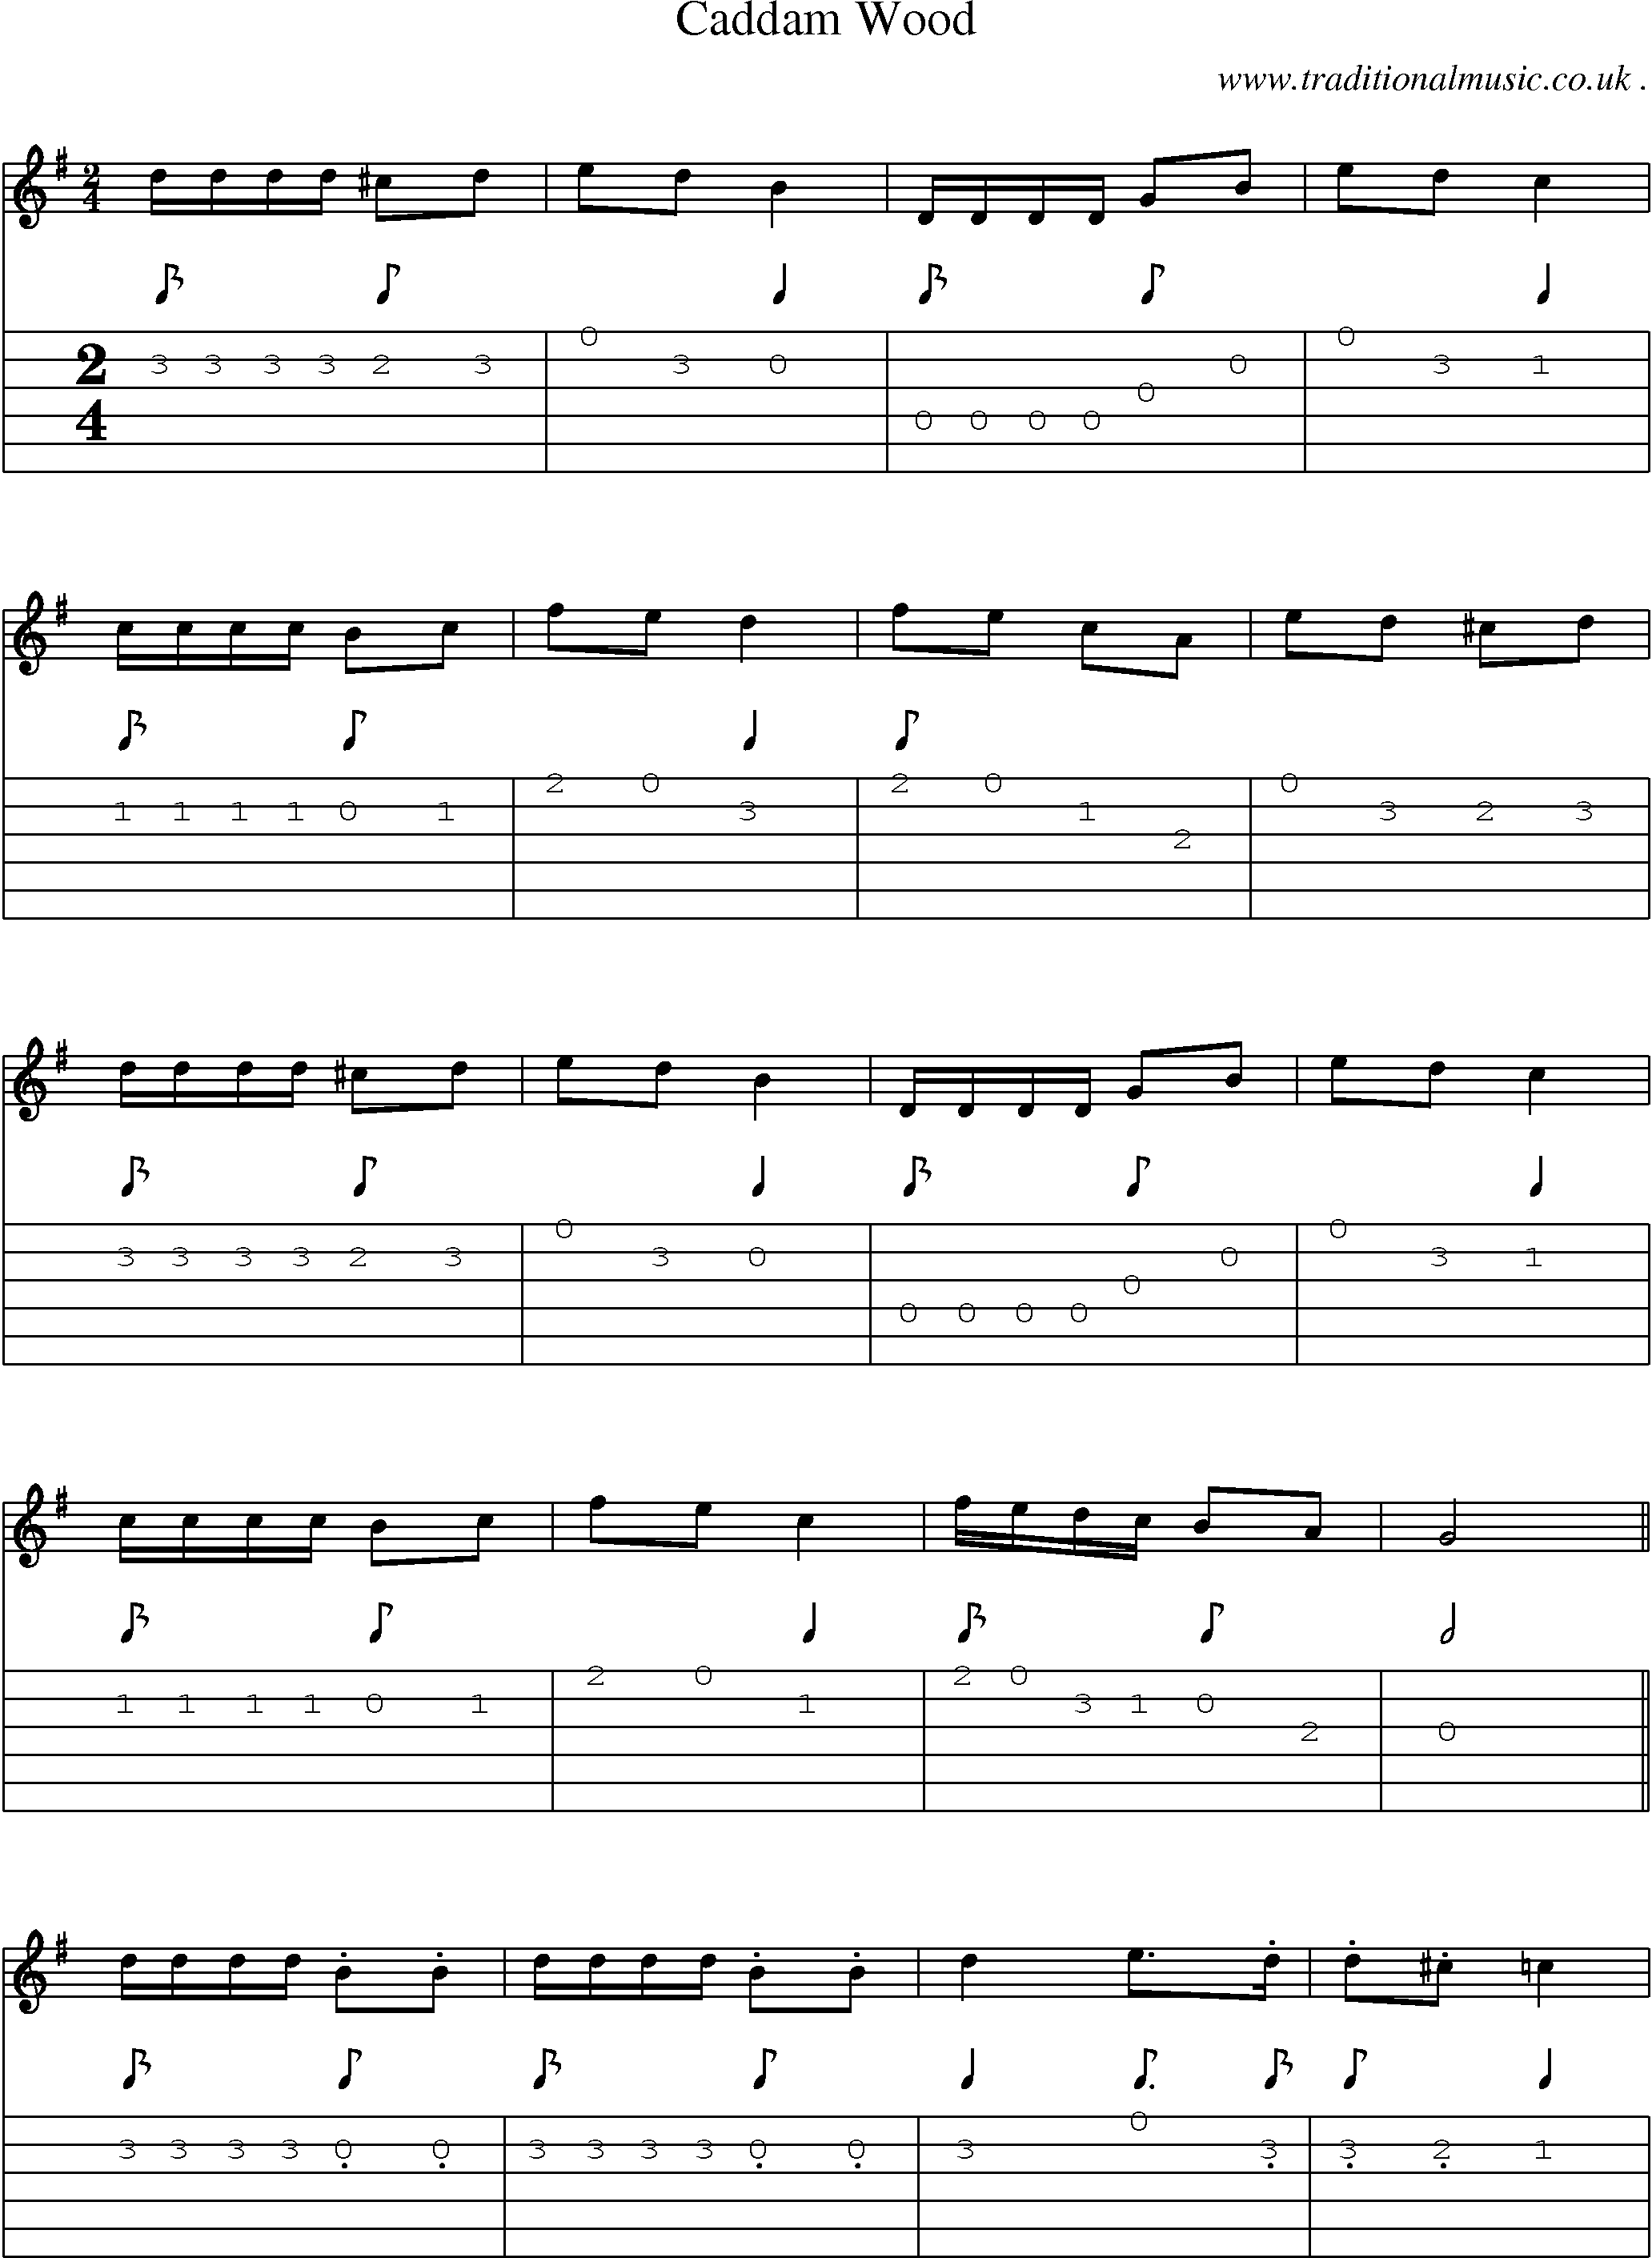 Sheet-Music and Guitar Tabs for Caddam Wood